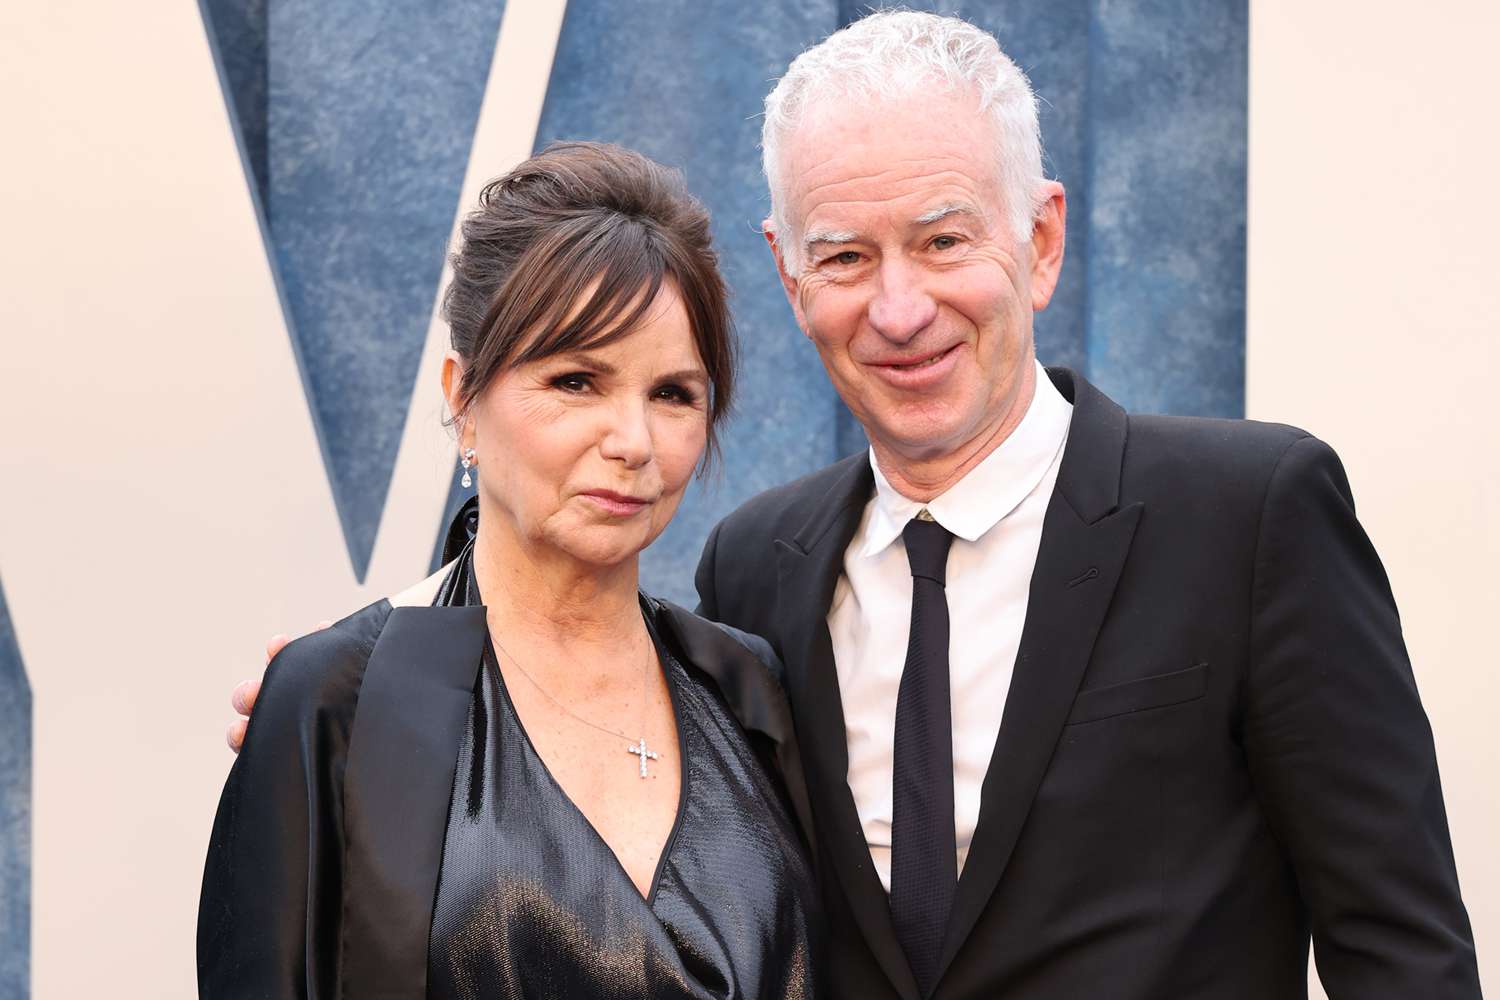 John McEnroe Biography: Net Worth, Wife, Age, Height, Children, Movies, TV Shows, Parents